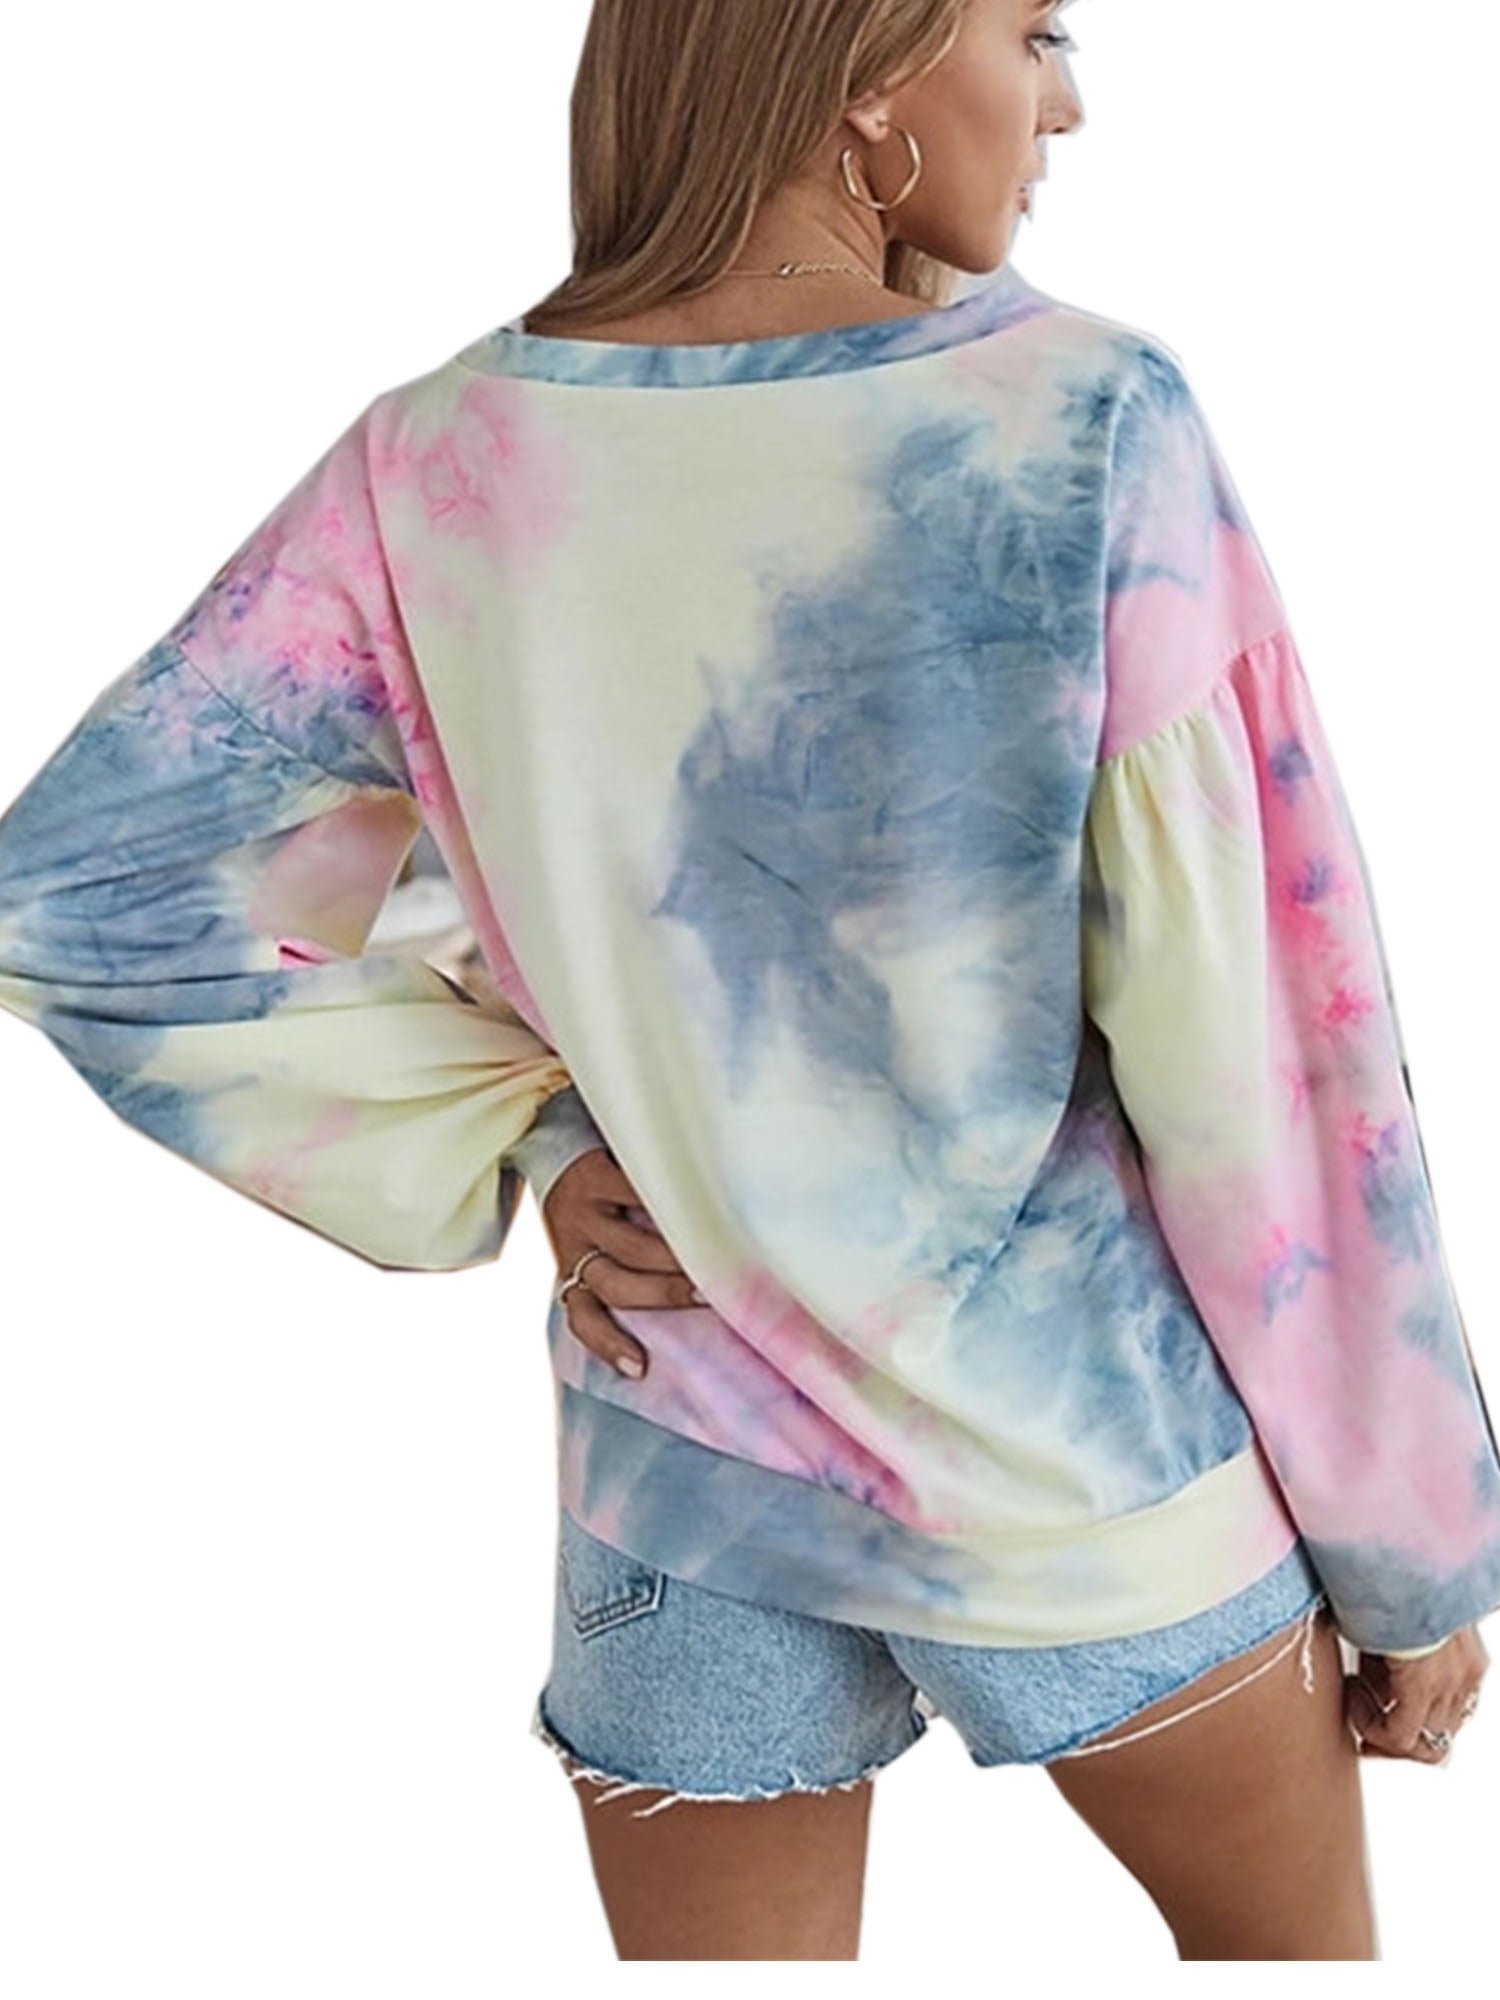 ZBYY Pullover for Women Tie Dye Print Sweatshirt Round Neck Casual Long Sleeve Loose Tops Shirts Fashion Blouses